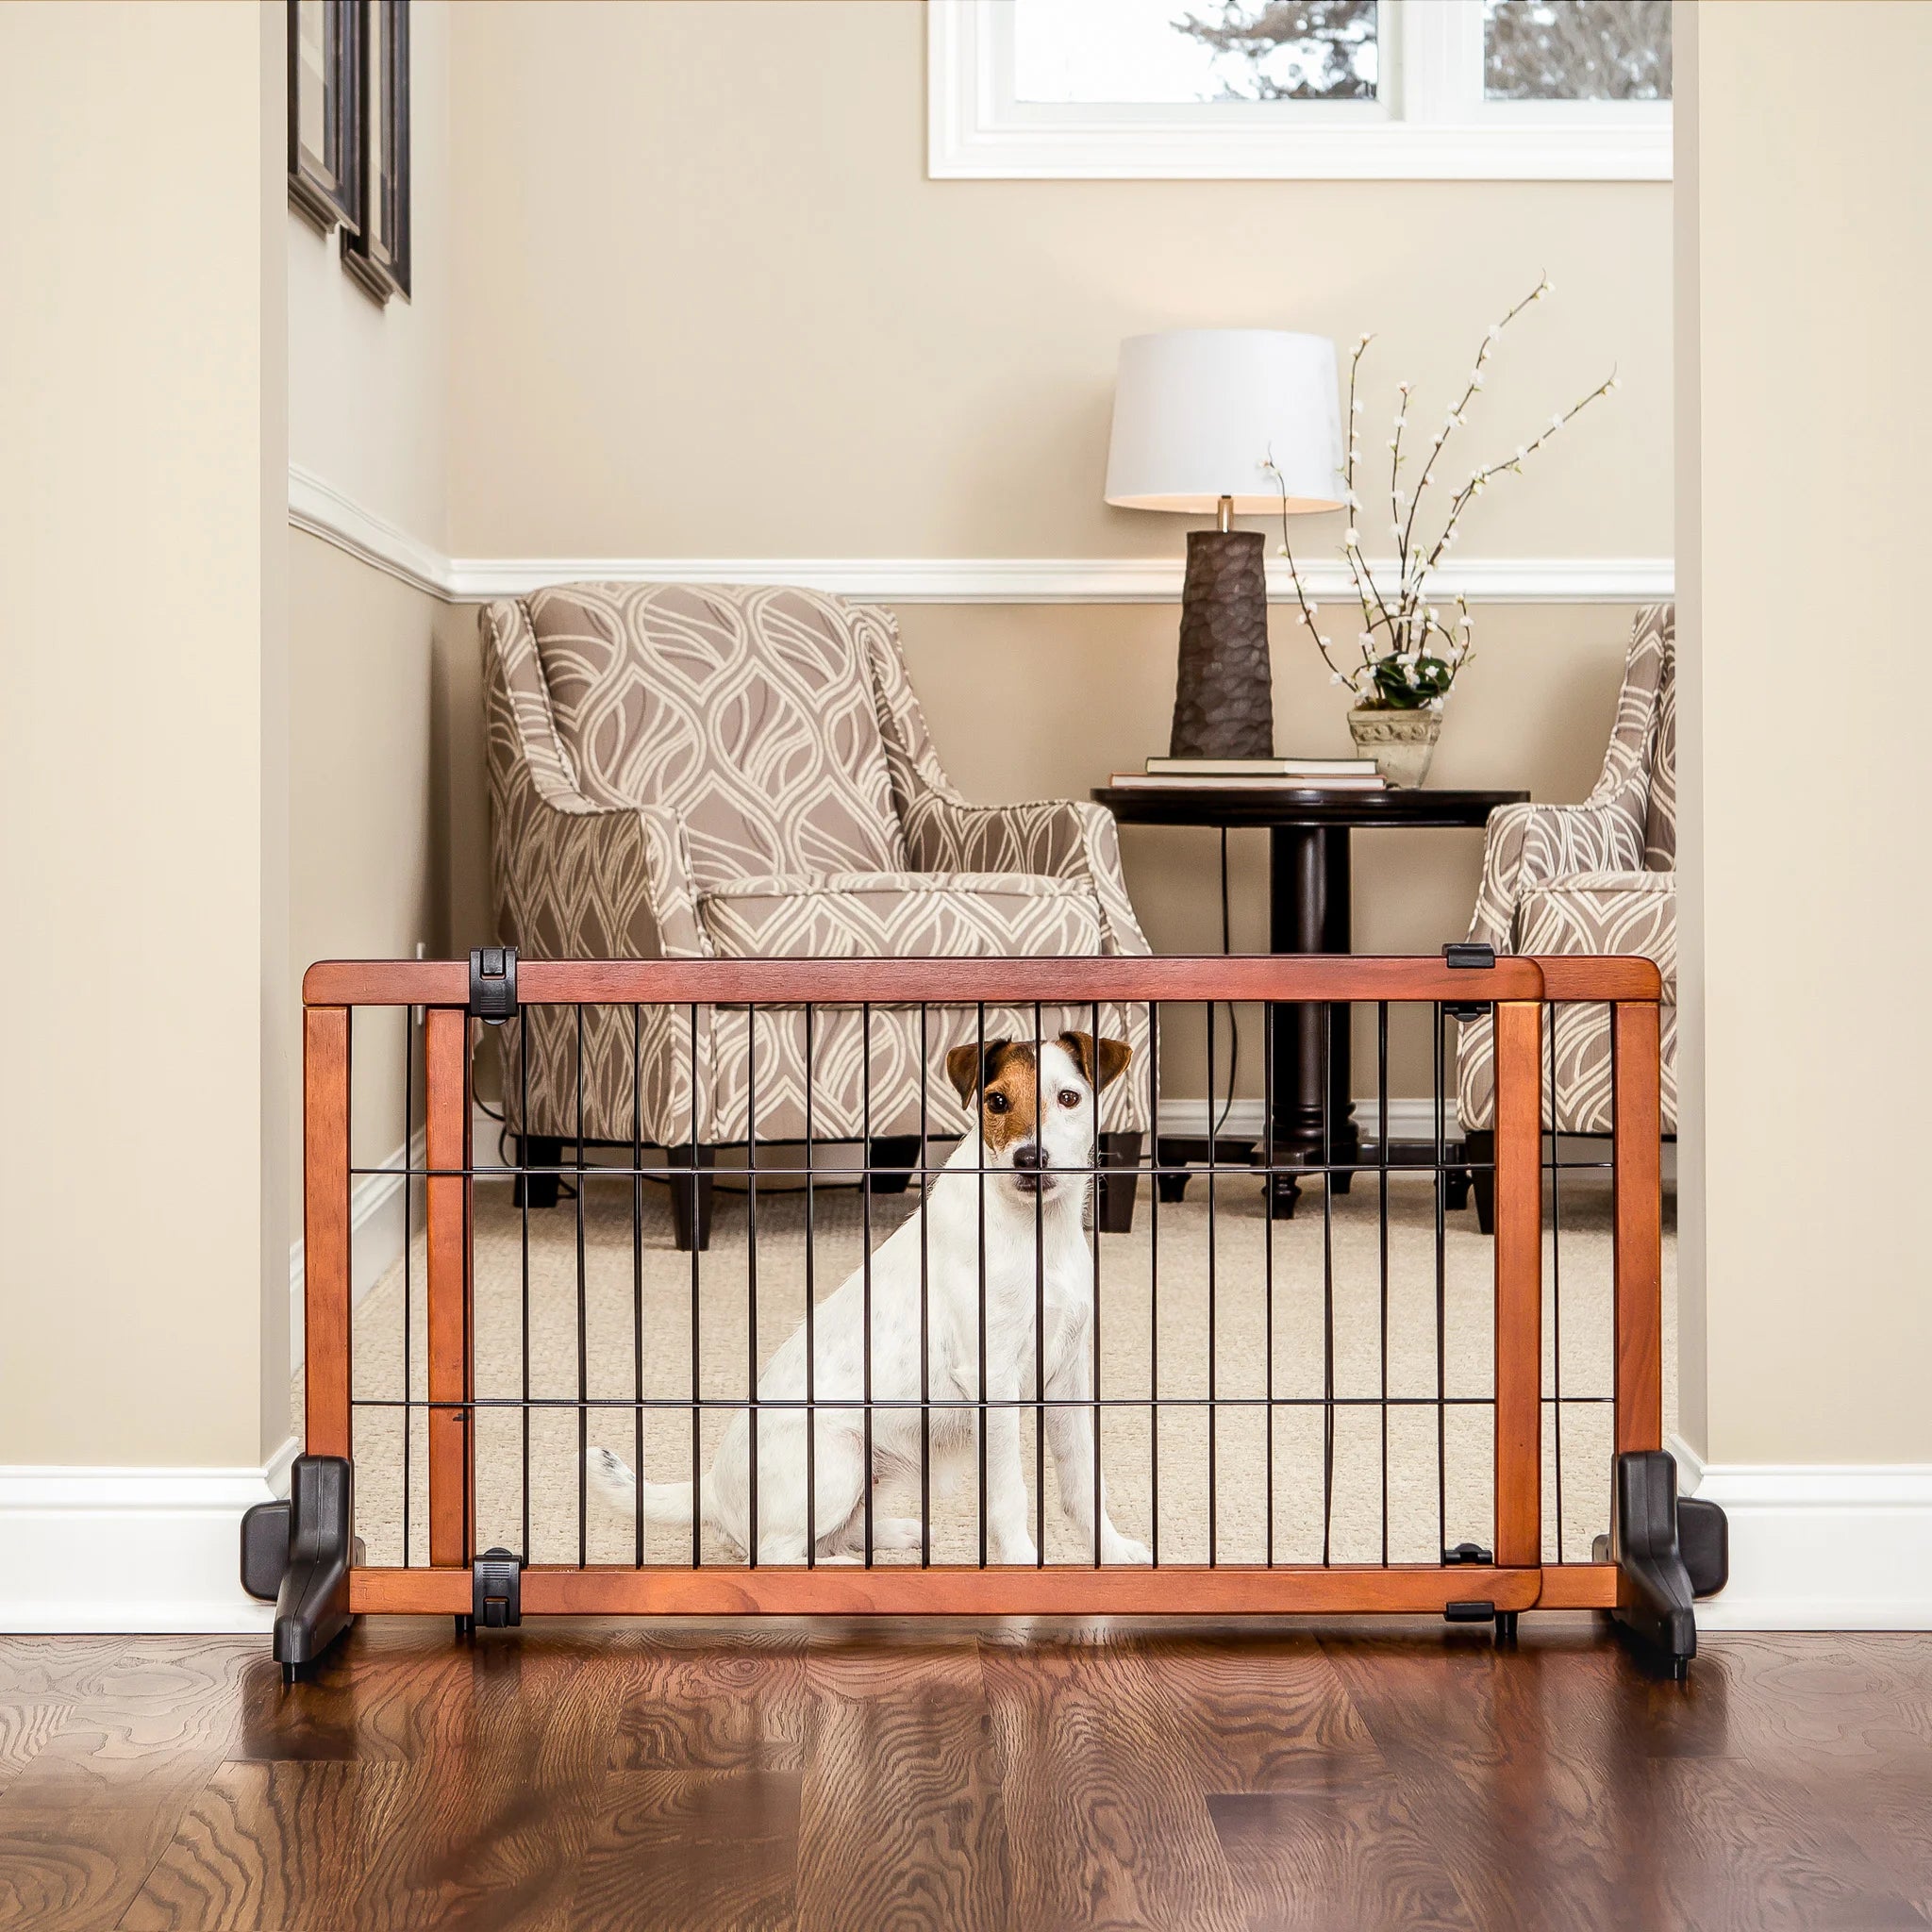 Dog sitting behind Design Paw Extra Wide Freestanding Pet Gate in living room.